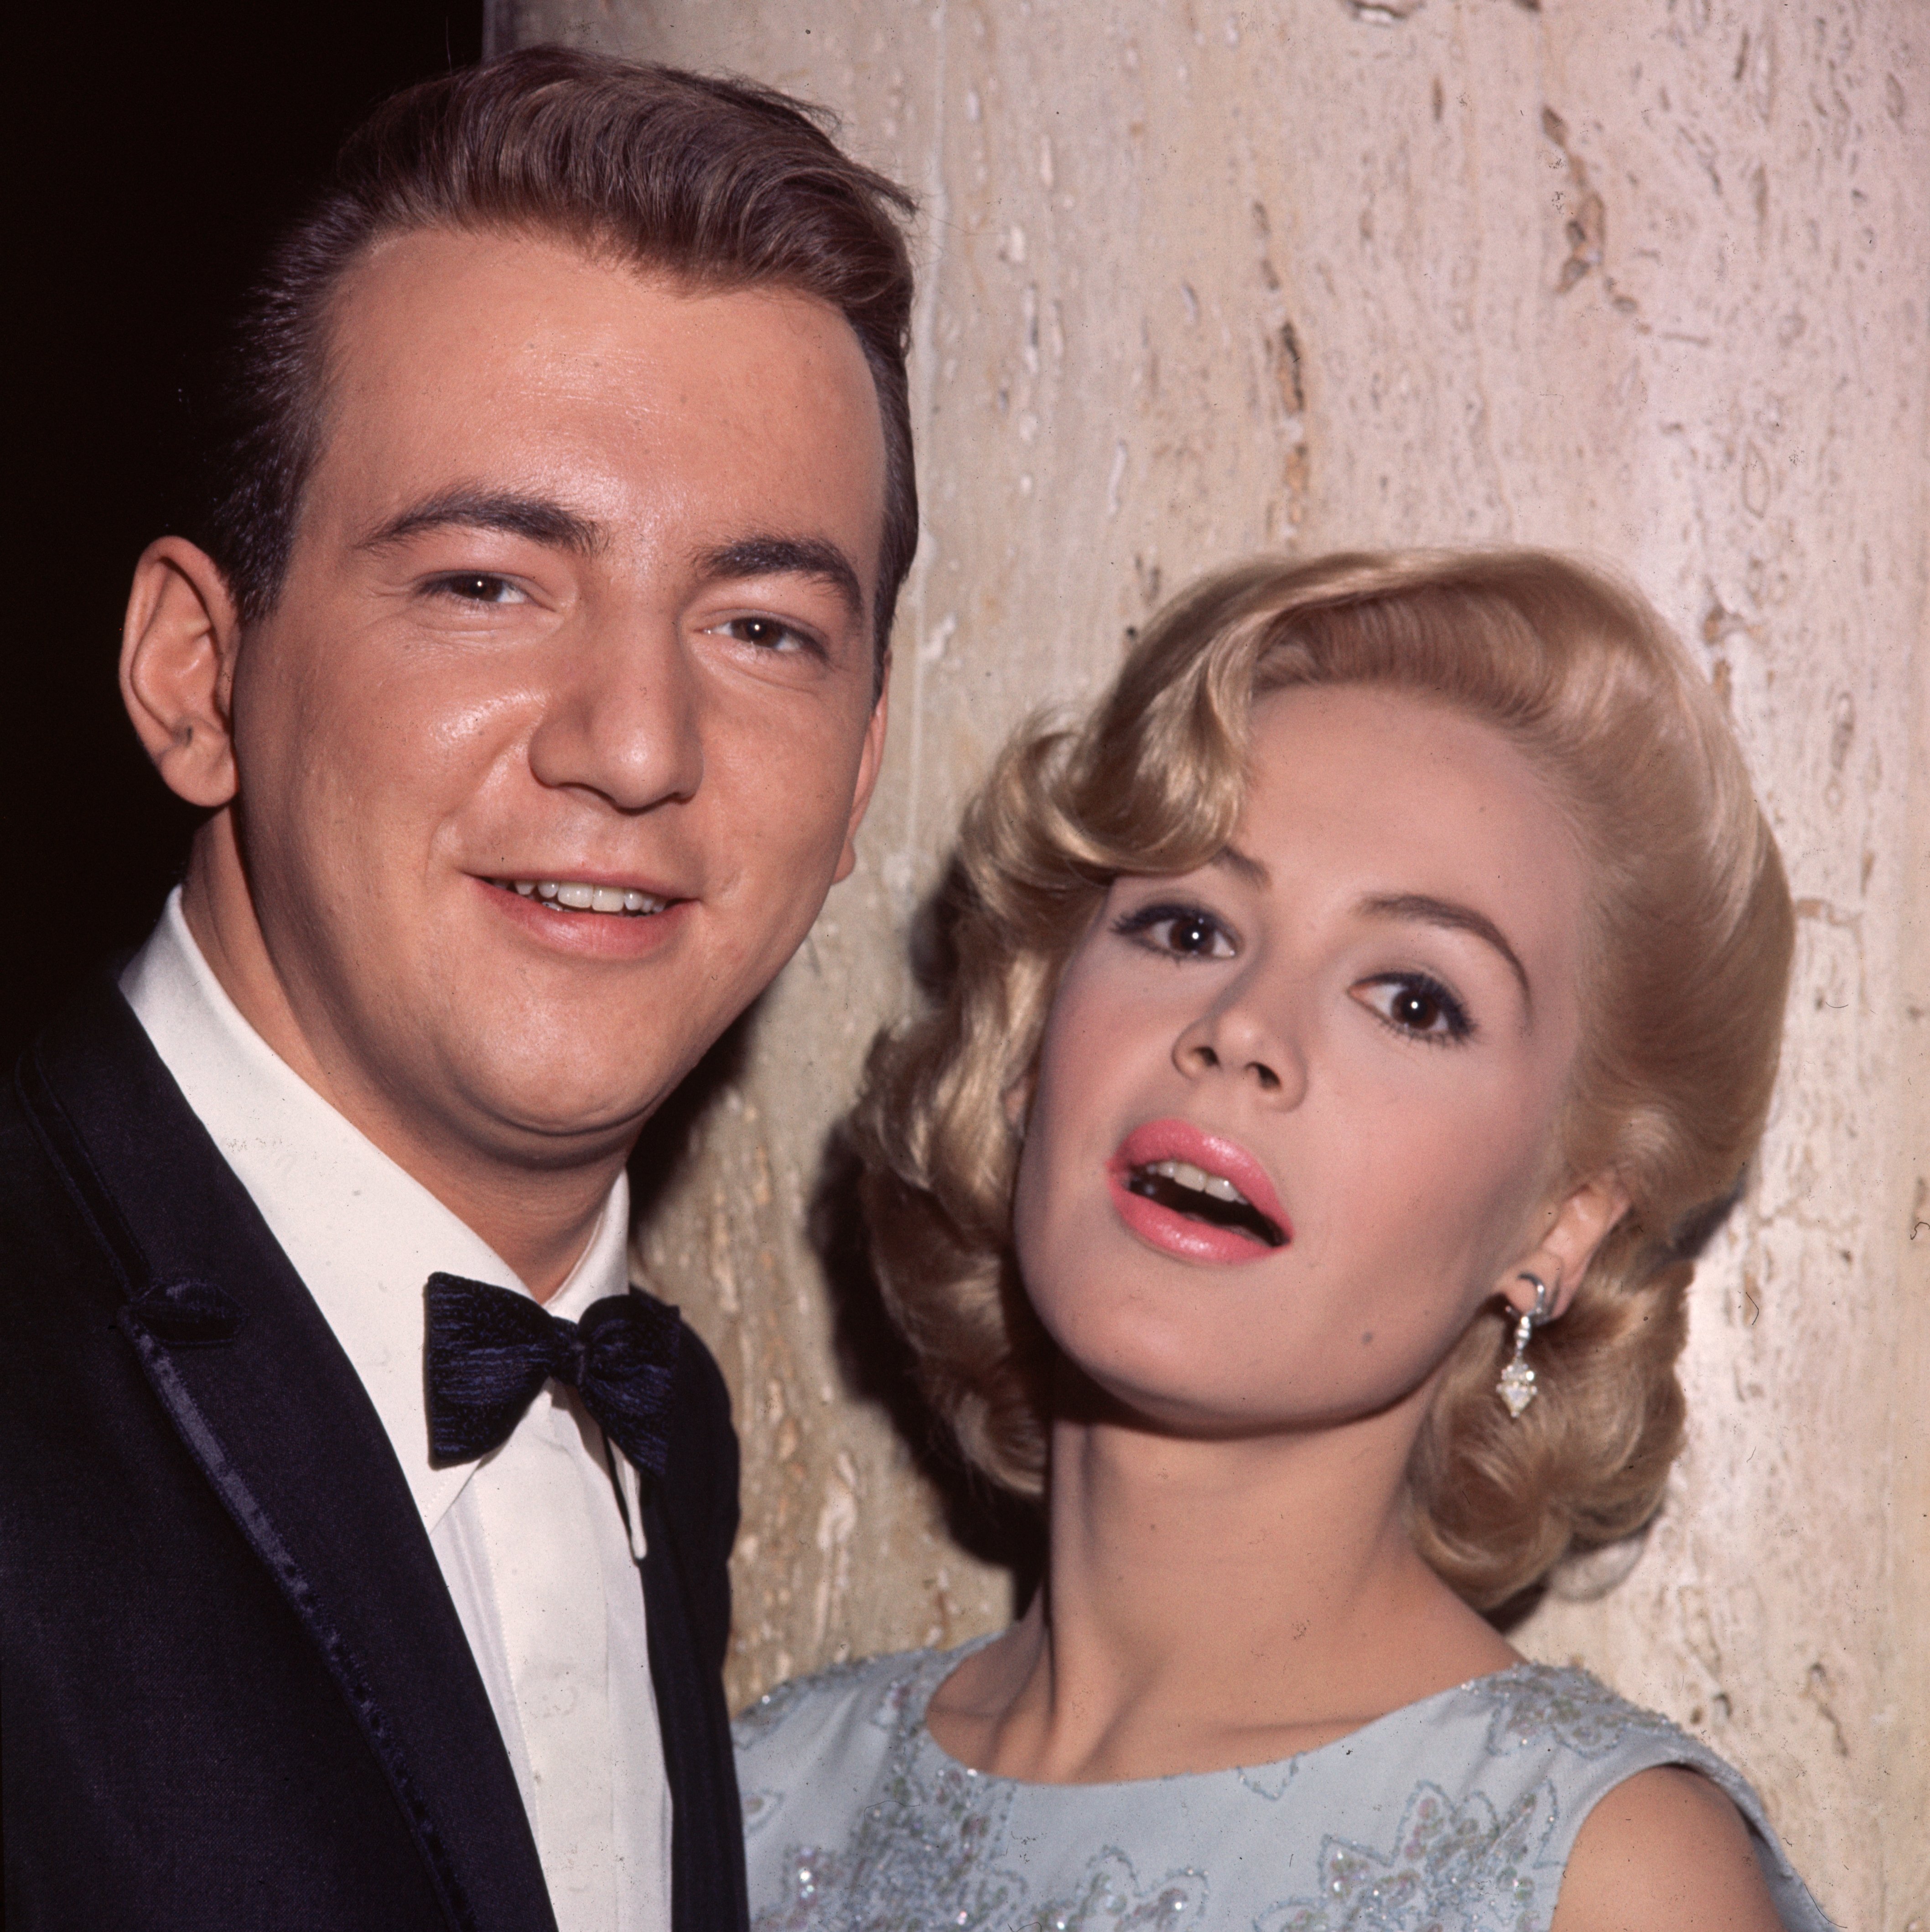 A headshot of Bobby Darin and Sandra Dee, circa 1962 | Source: Getty Images